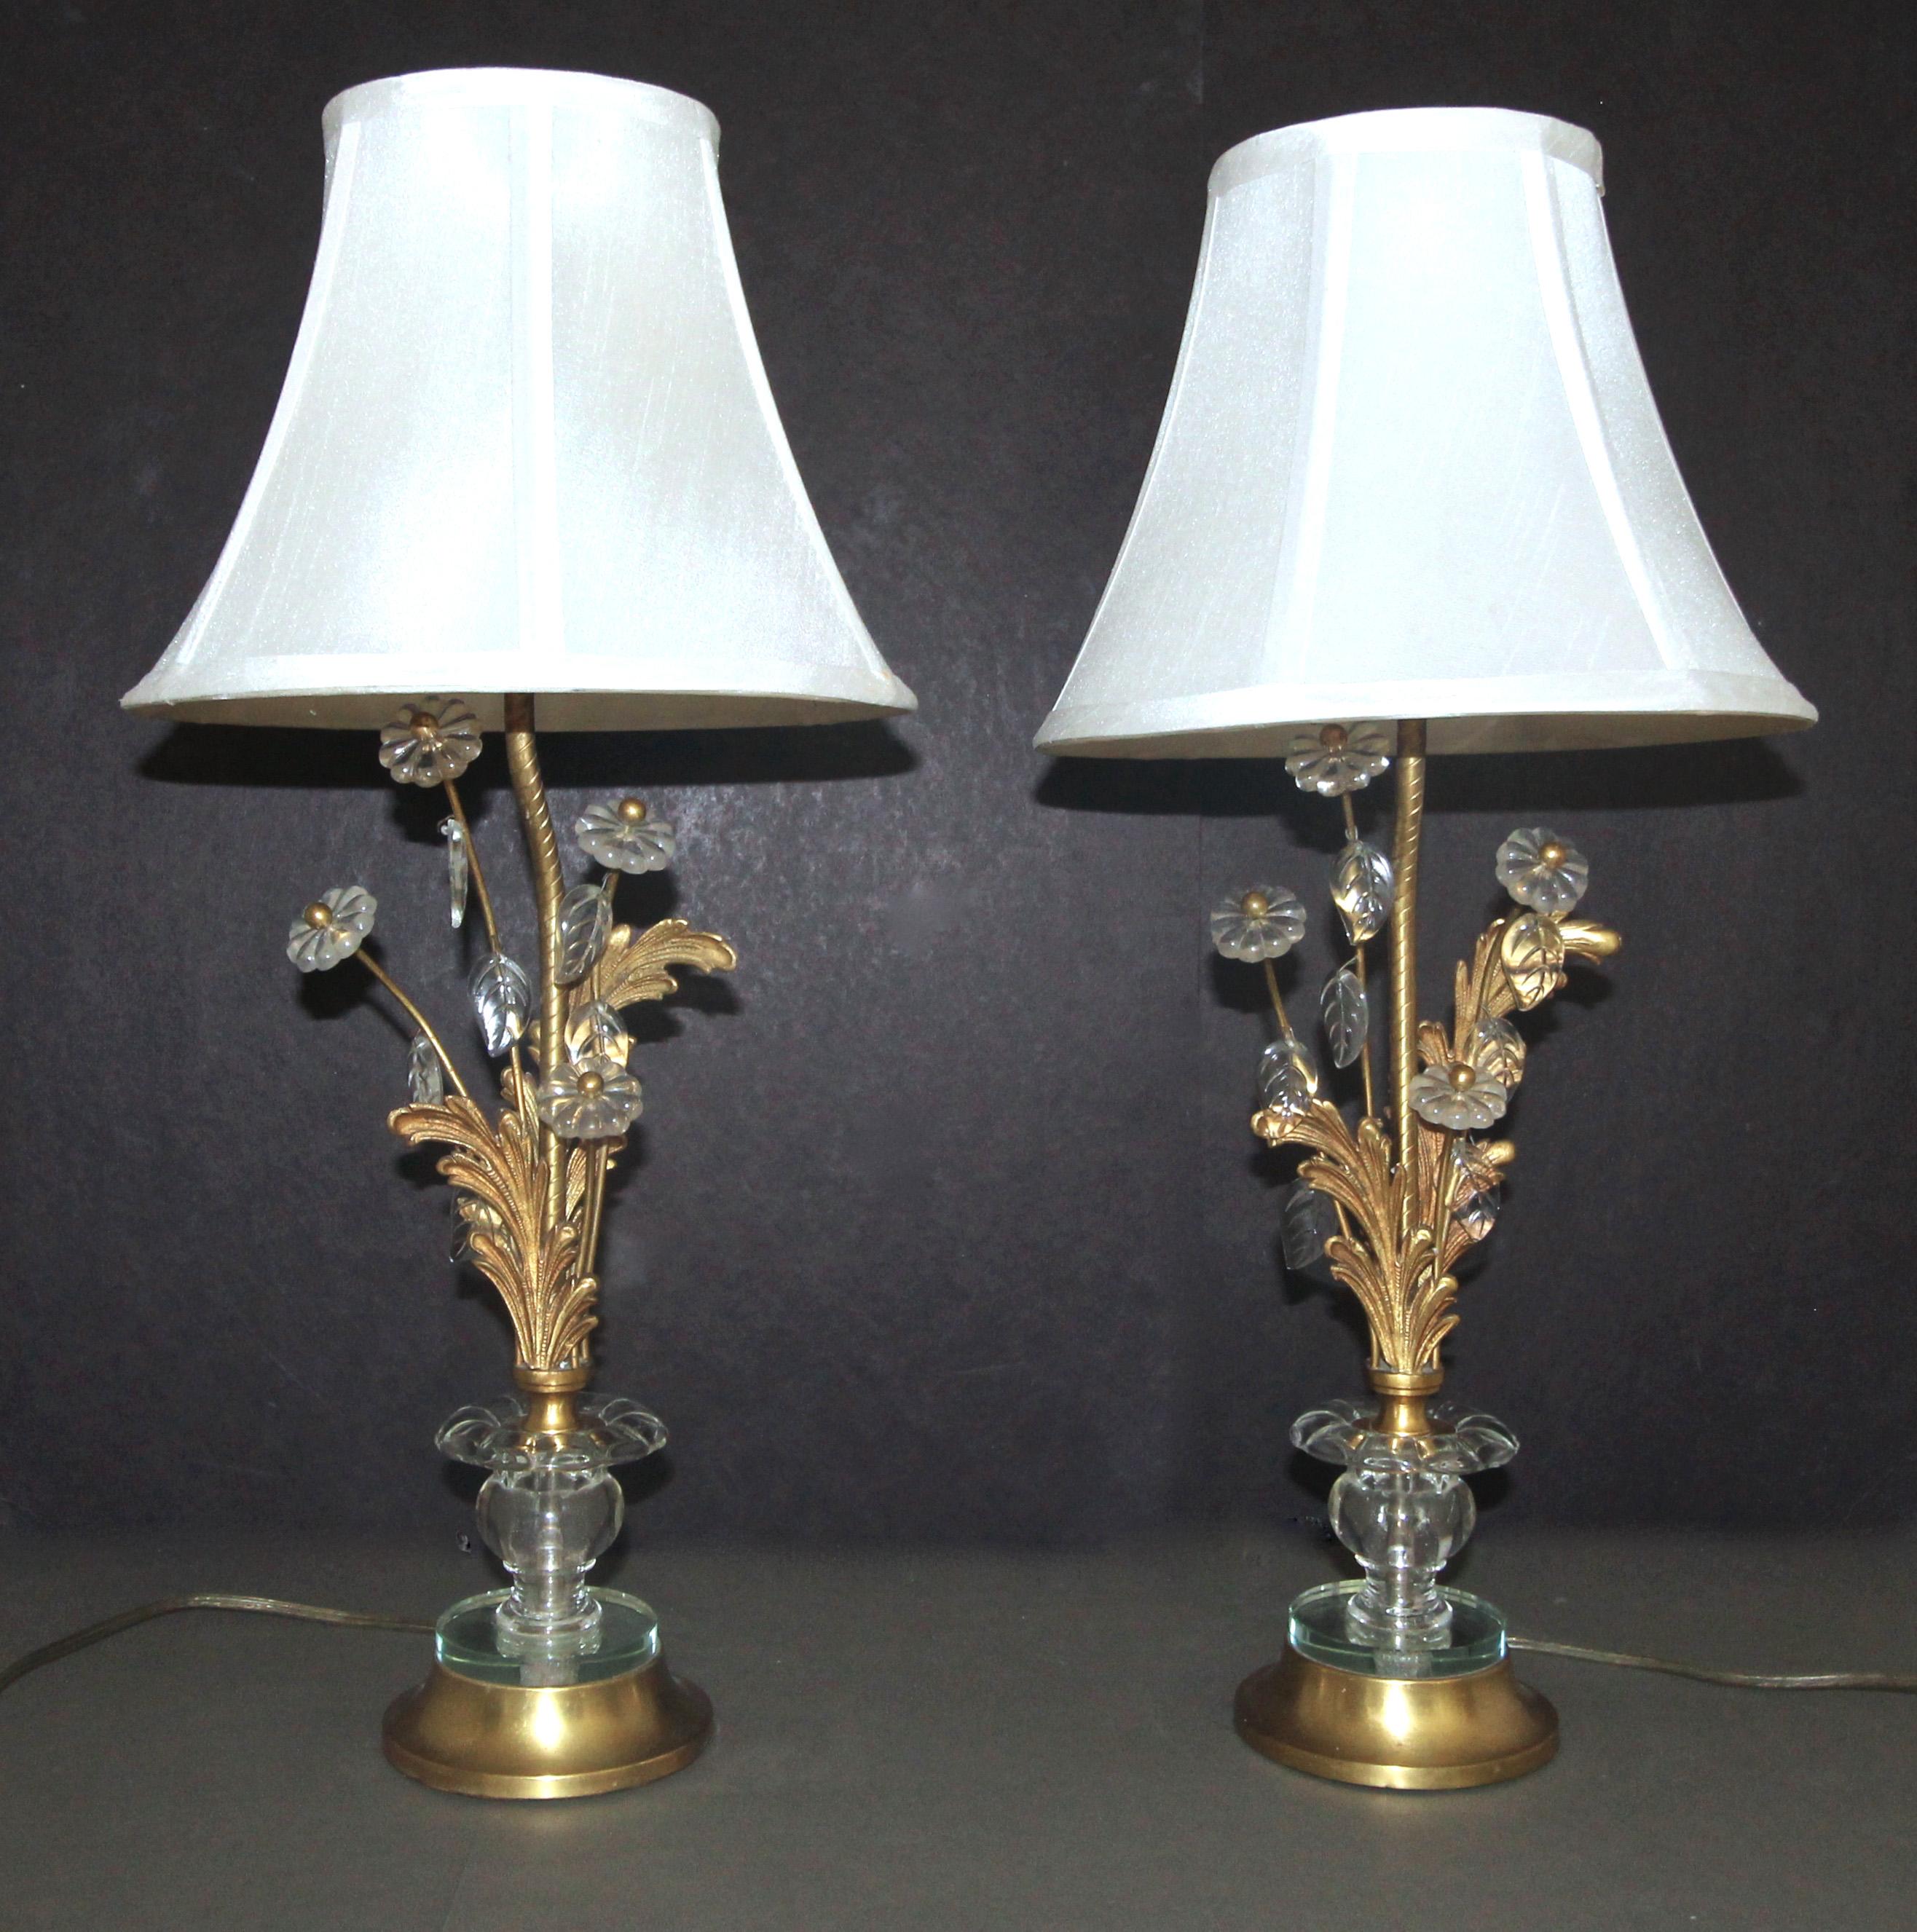 A pair of smaller scale French brass table or buffet lamps. Decorated with glass rosettes and leaves, and finely crafted foliate embellishments. Base is bass and mirrored glass. Each light uses regular A base bulb.
Shades included. 

Measures: